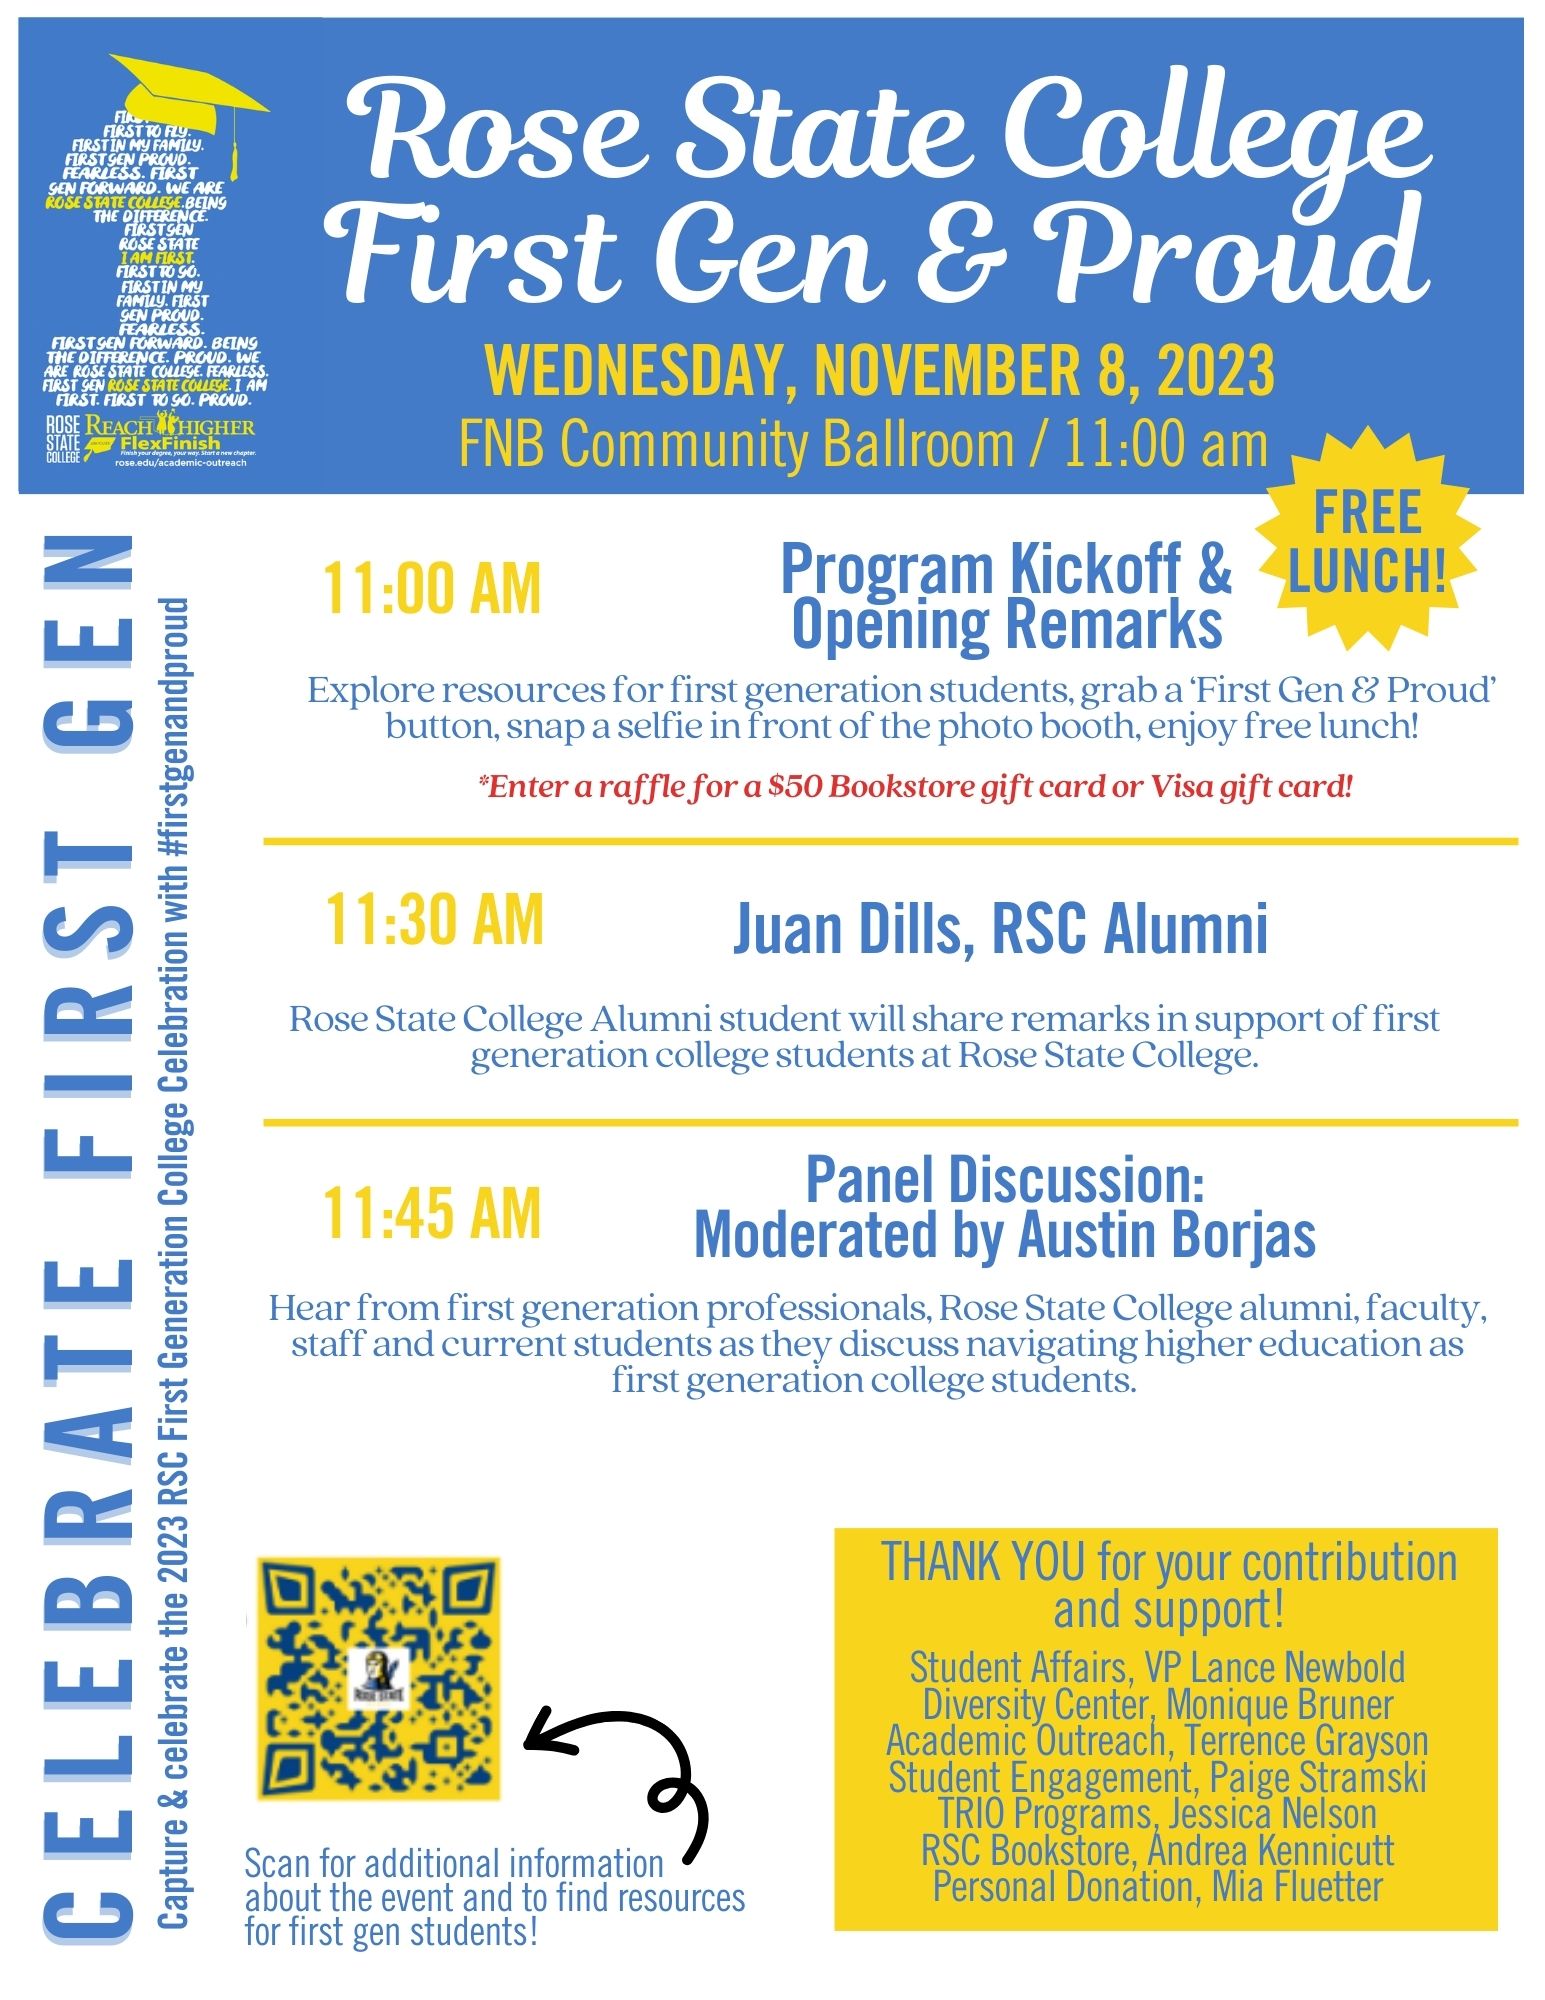 Rose State College First Generation Celebration